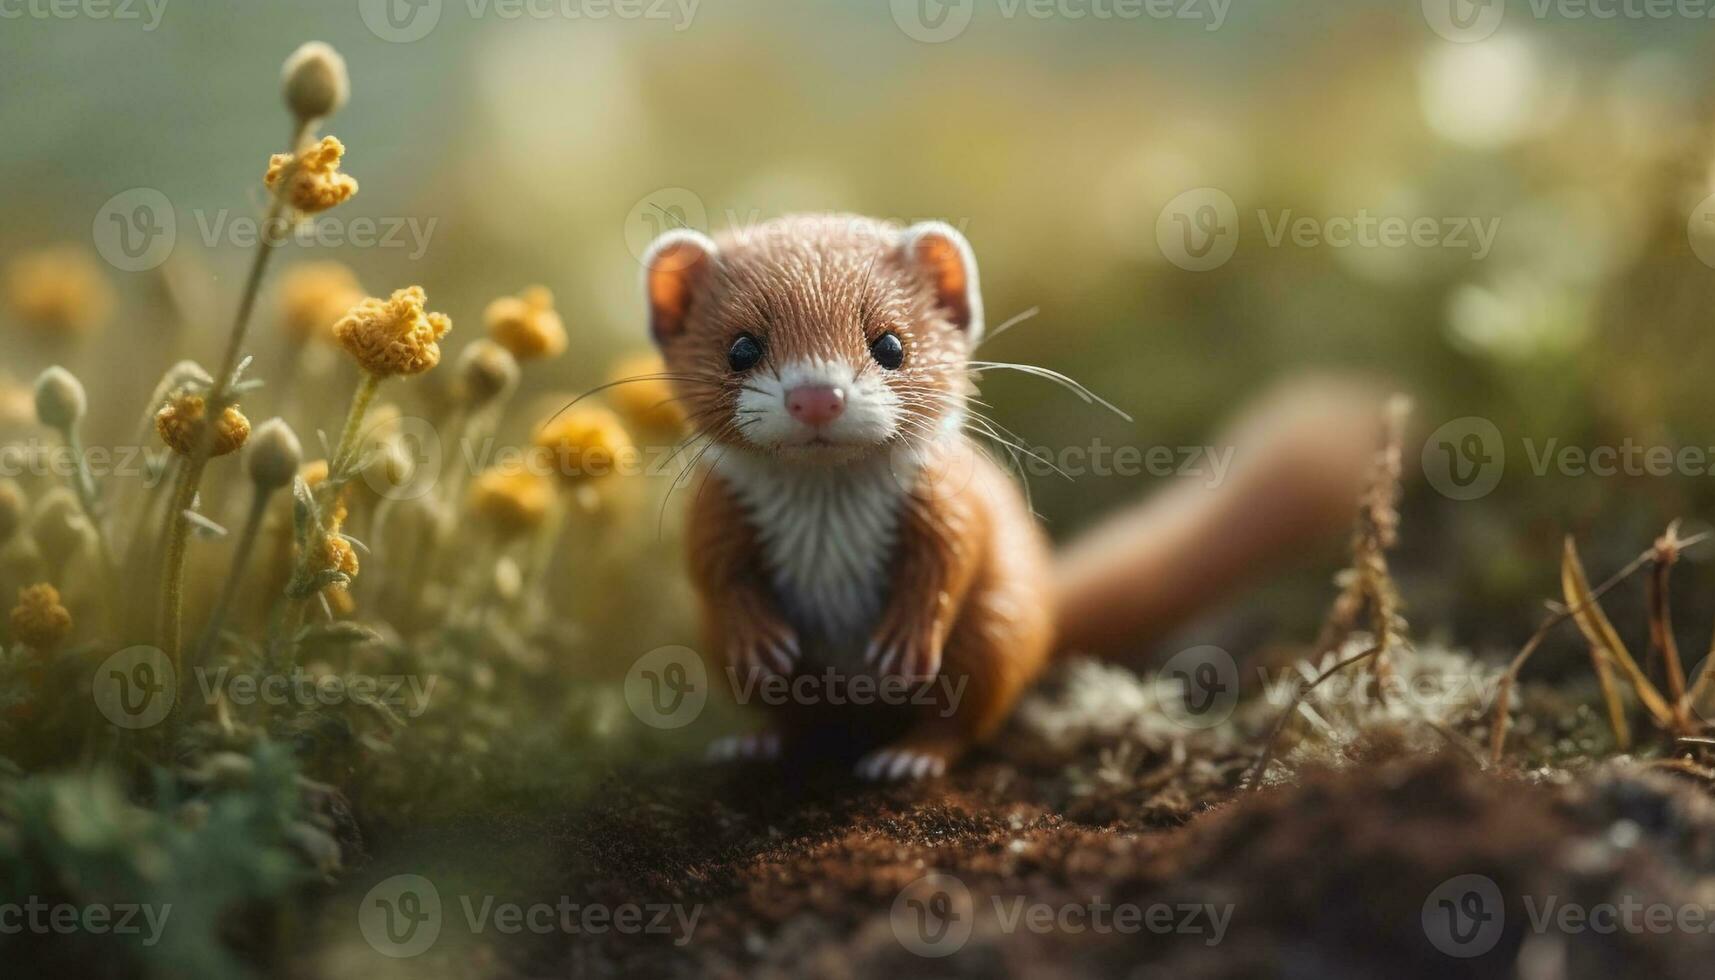 Cute small kitten sitting in grass, looking at camera playfully generated by AI photo